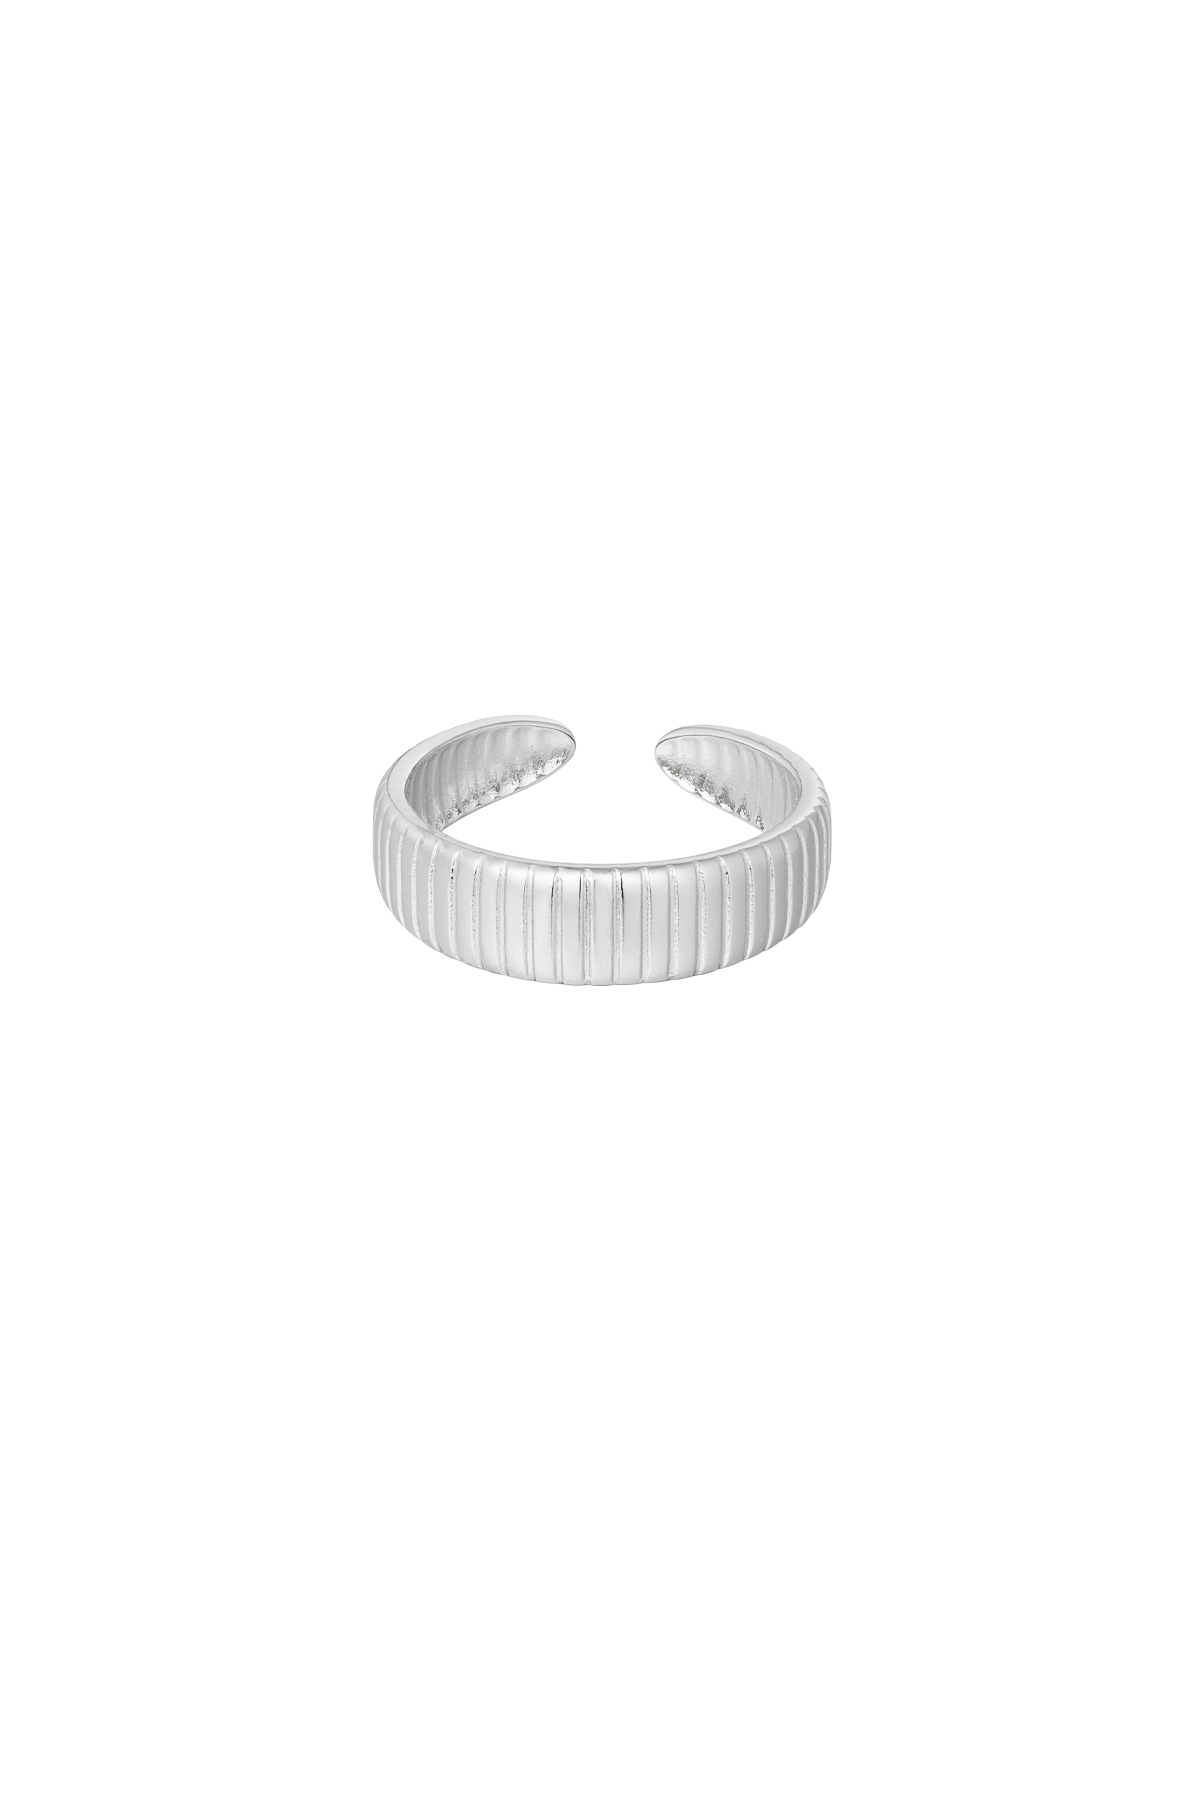 Ring striped - silver